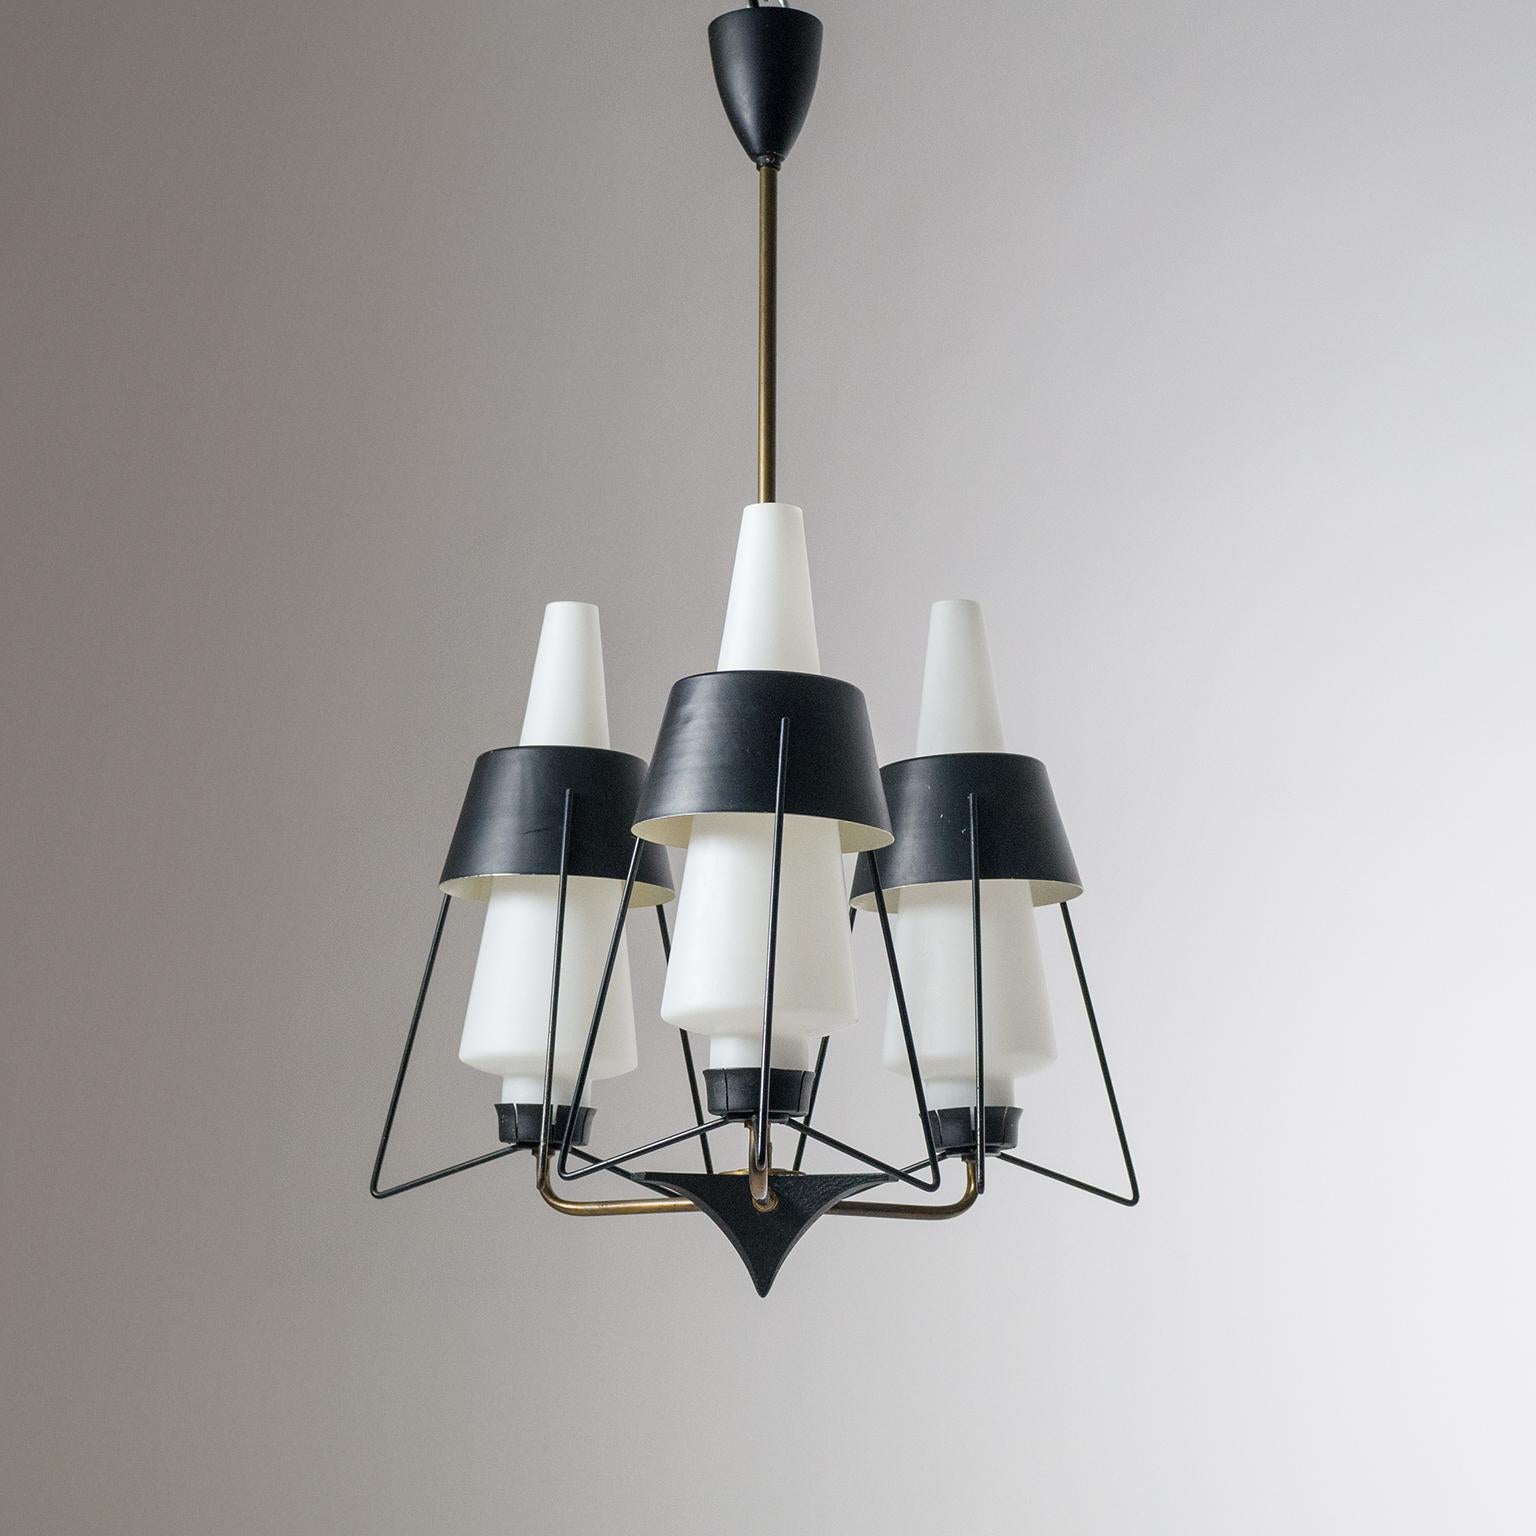 Very unique modernist Italian chandelier from the 1950s. Three brass arms each with a satin glass 'triplex opal' diffuser encased in Sputnik like structure with black lacquered shades. Fine original condition with patina on the brass and some light